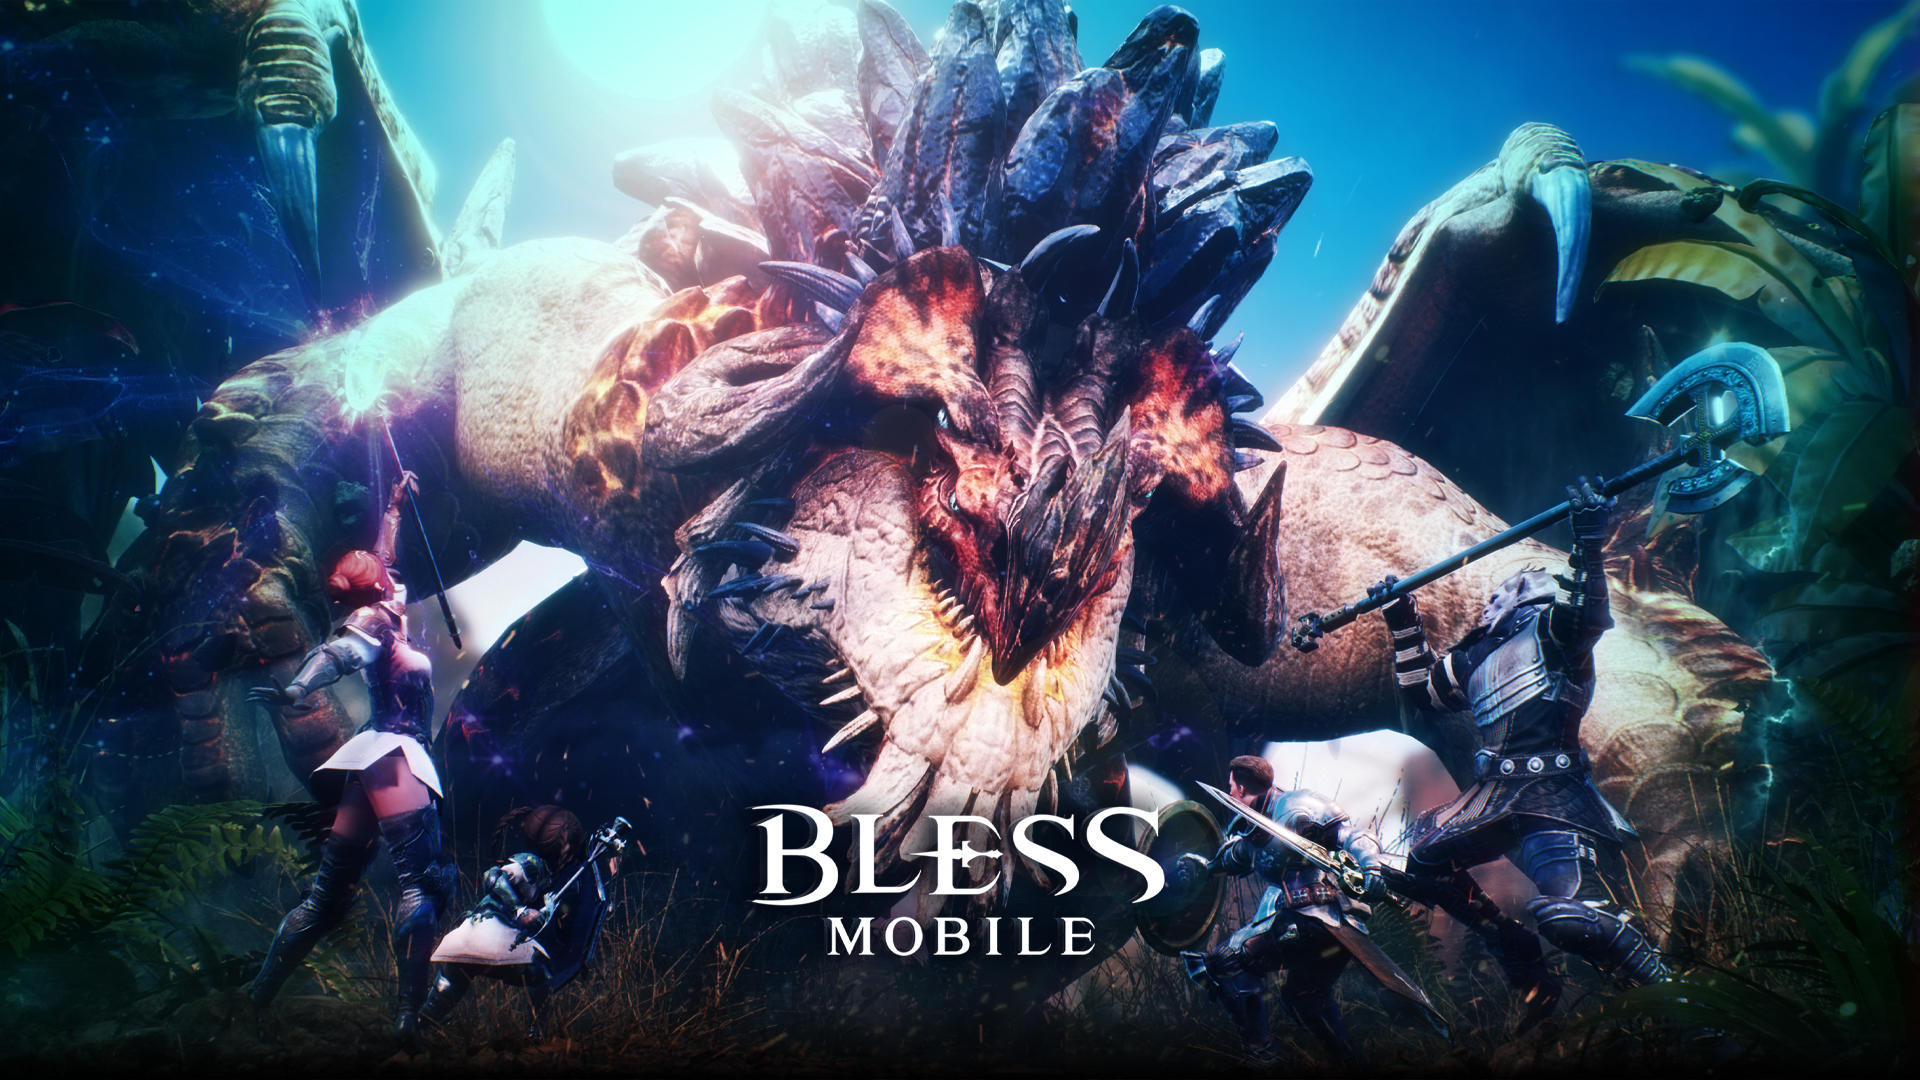 BLESS MOBILE游戏截图